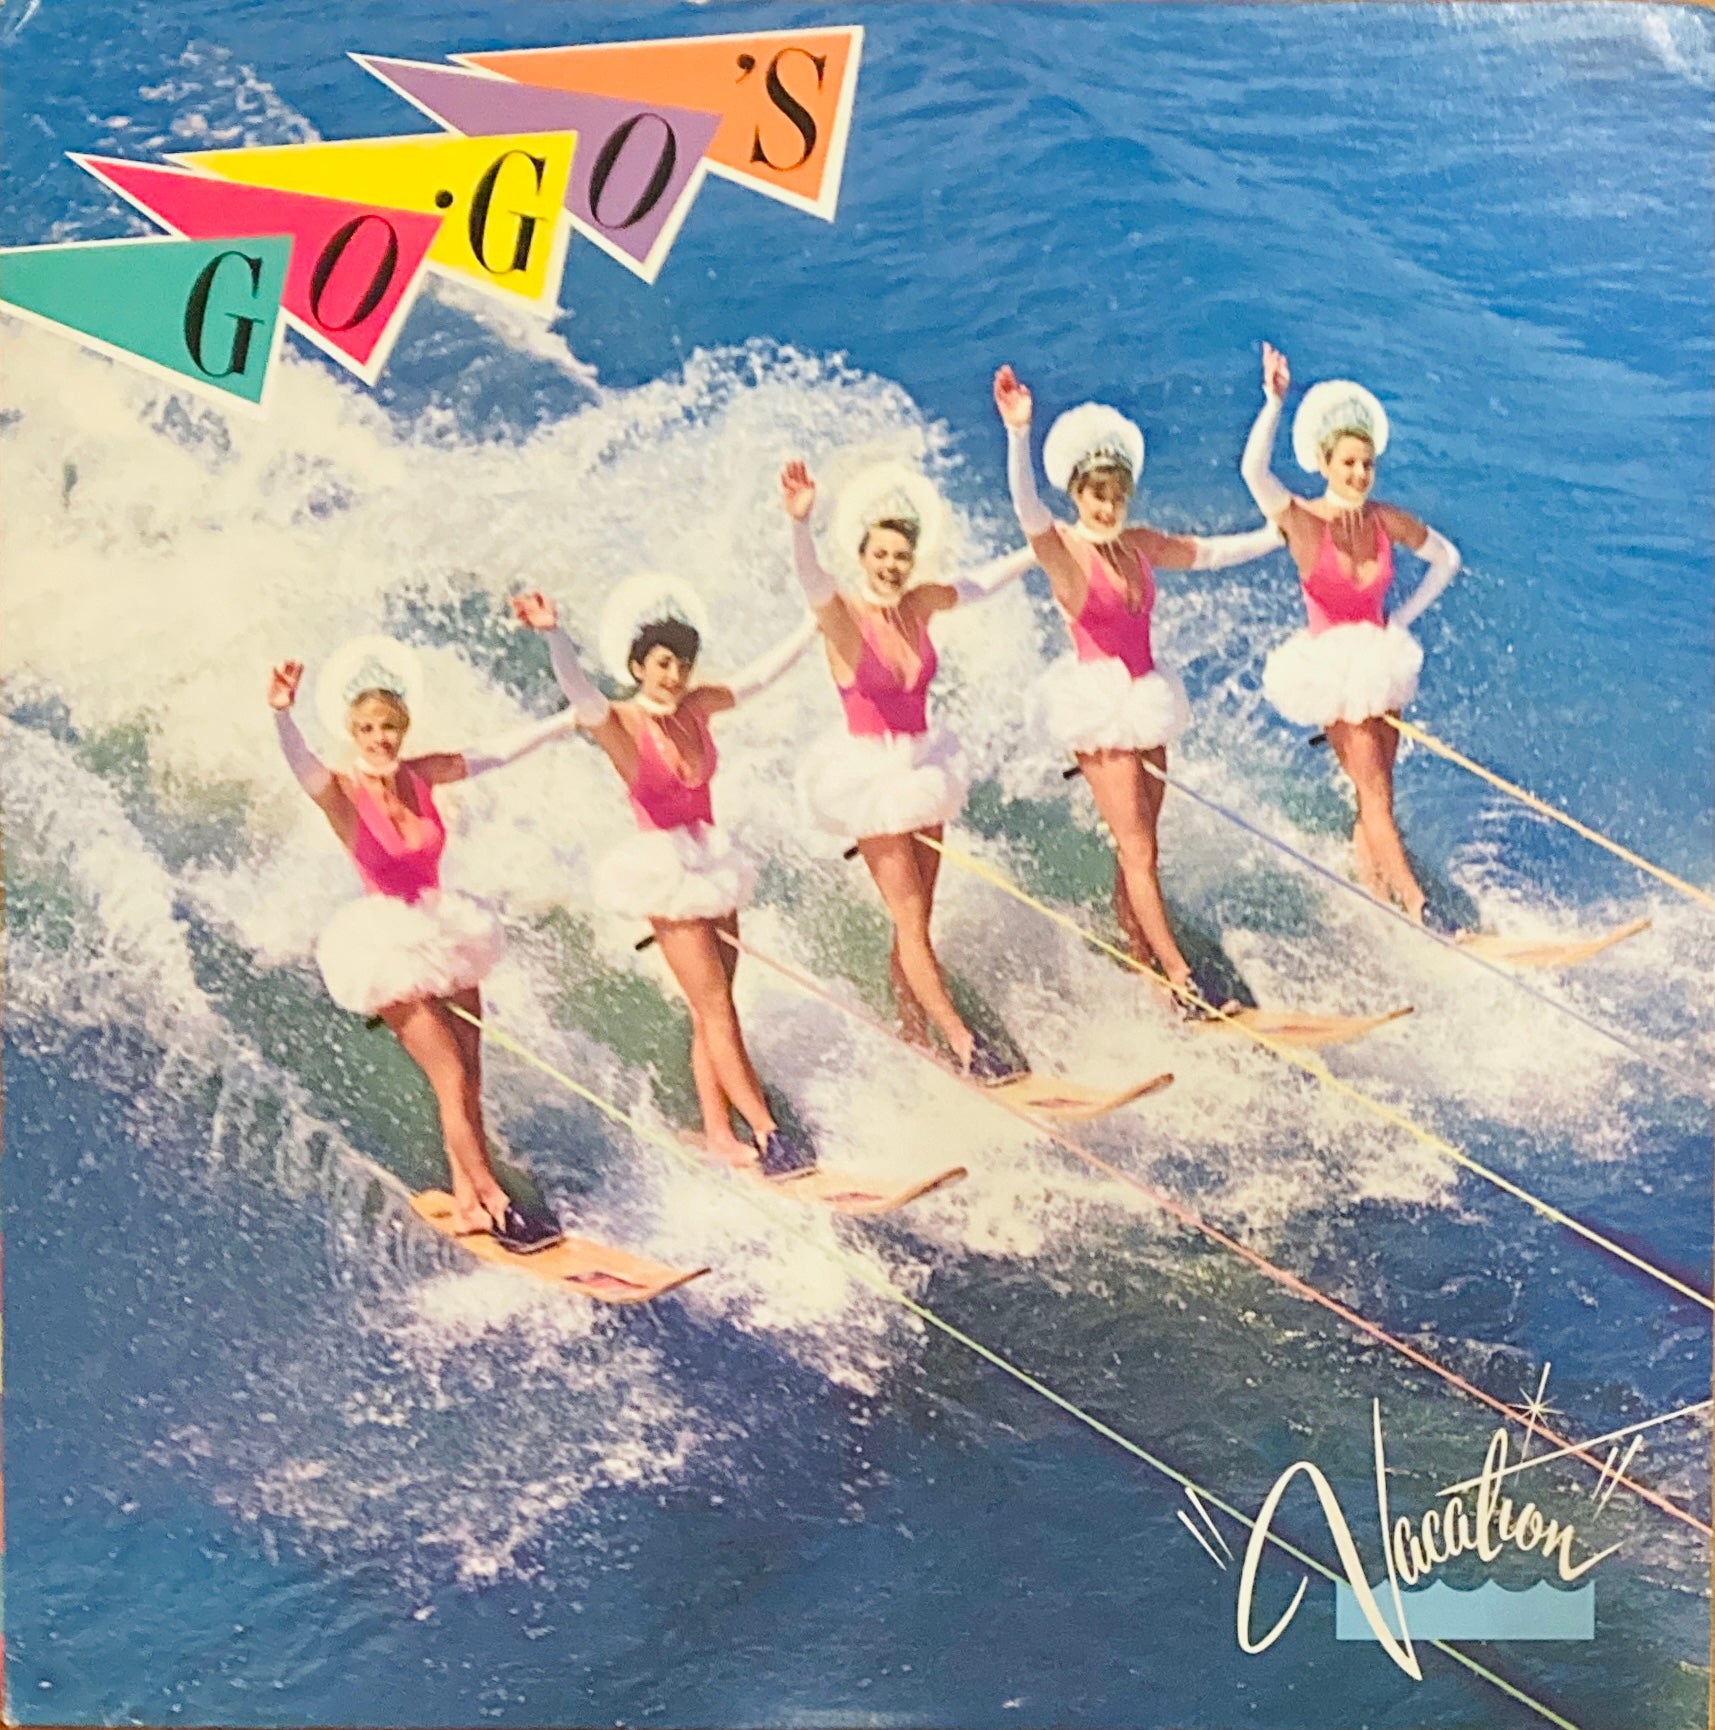 Go-Go’s “Vacation” LP (1982)